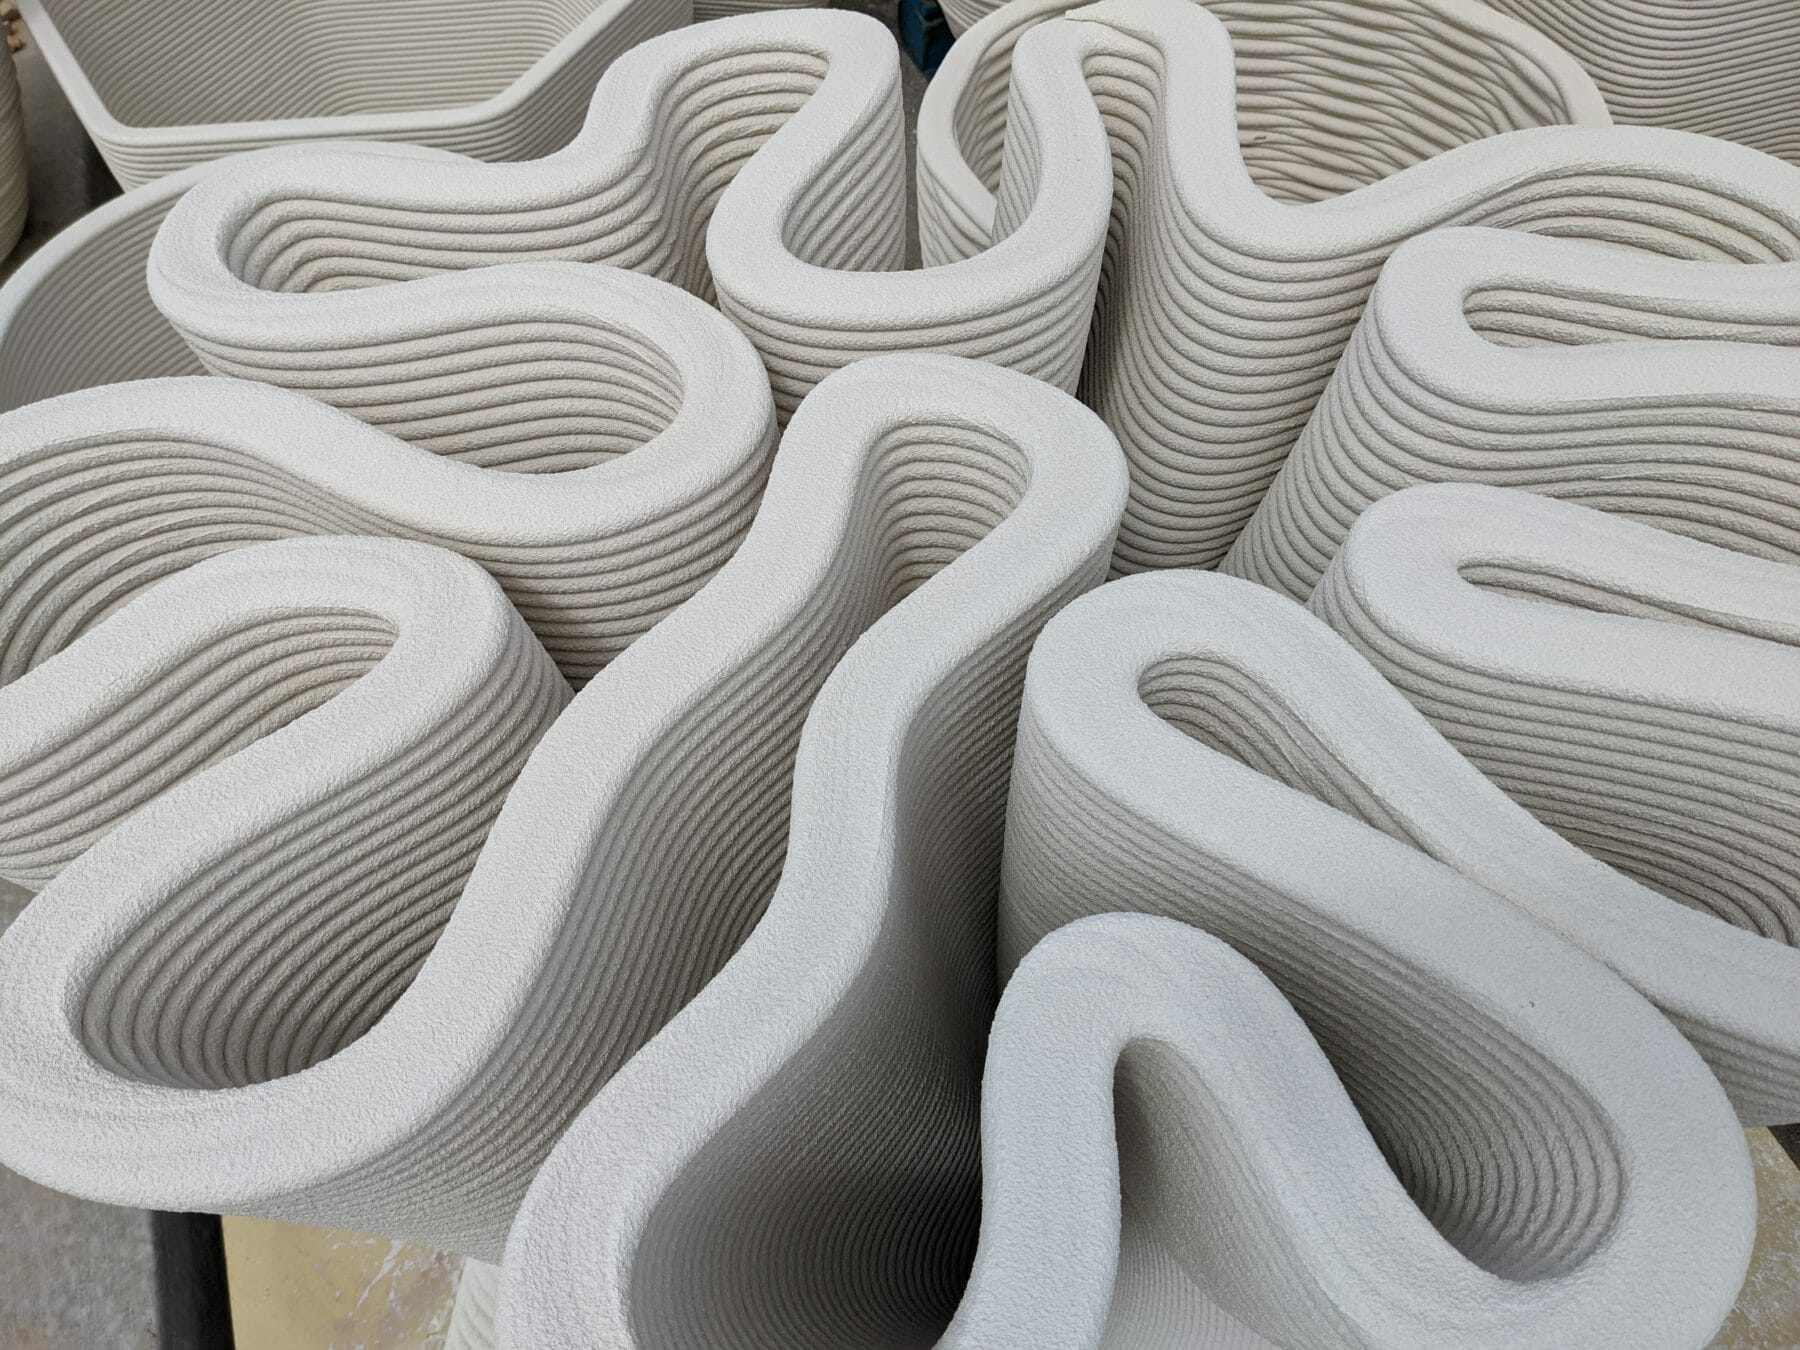 Pikus 3D has tested Sika admixture-based mortar and inks for printing products and smaller elements. Photo via Pikus 3D.